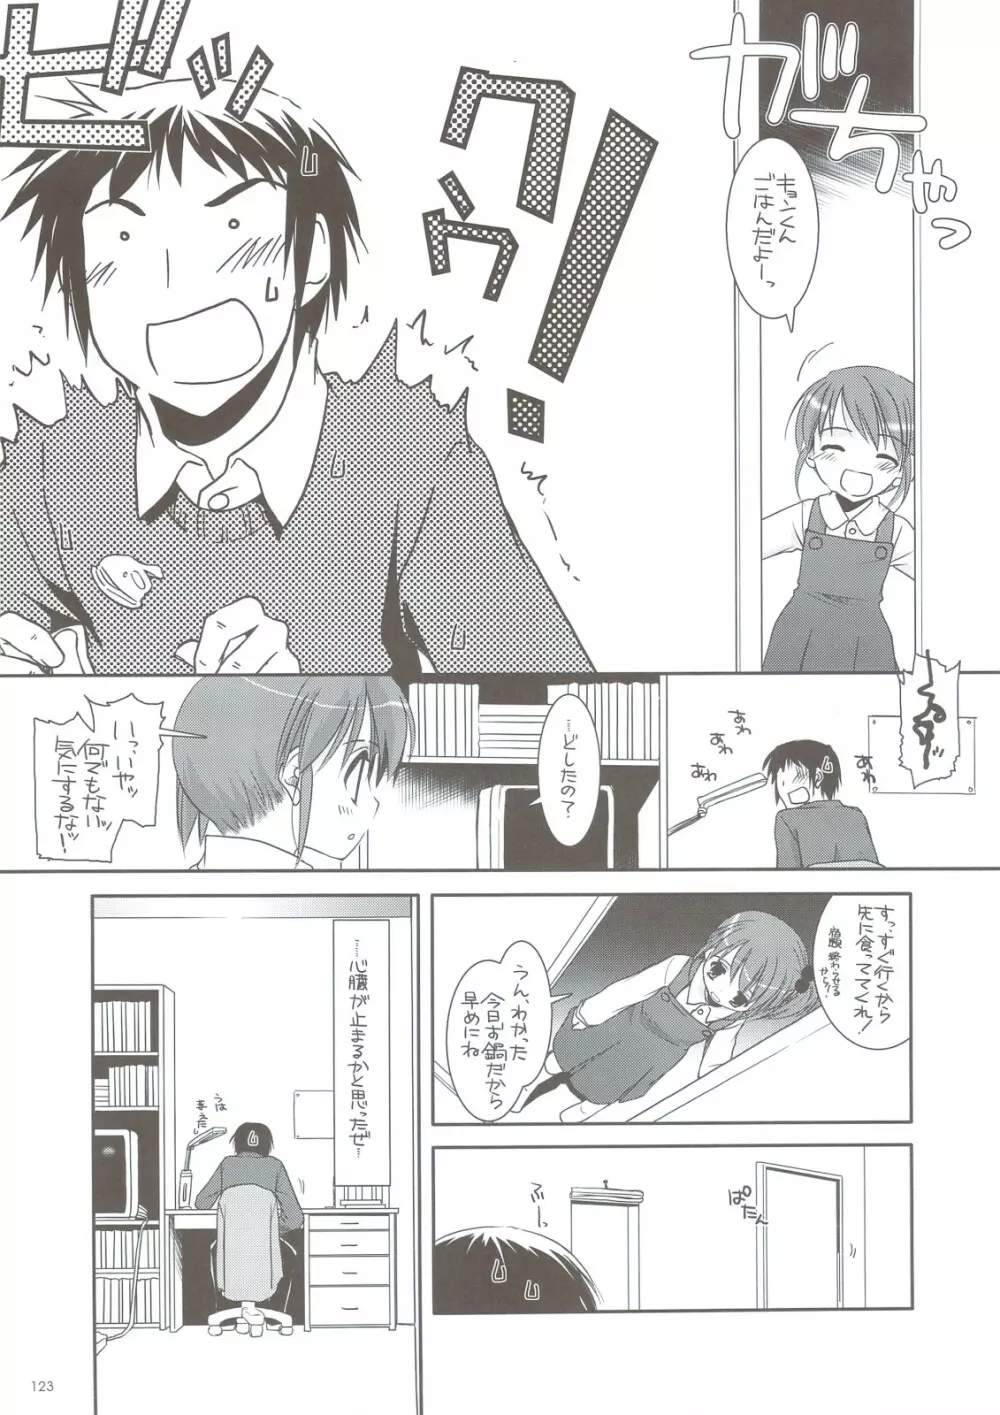 DL-SOS 総集編 - page122